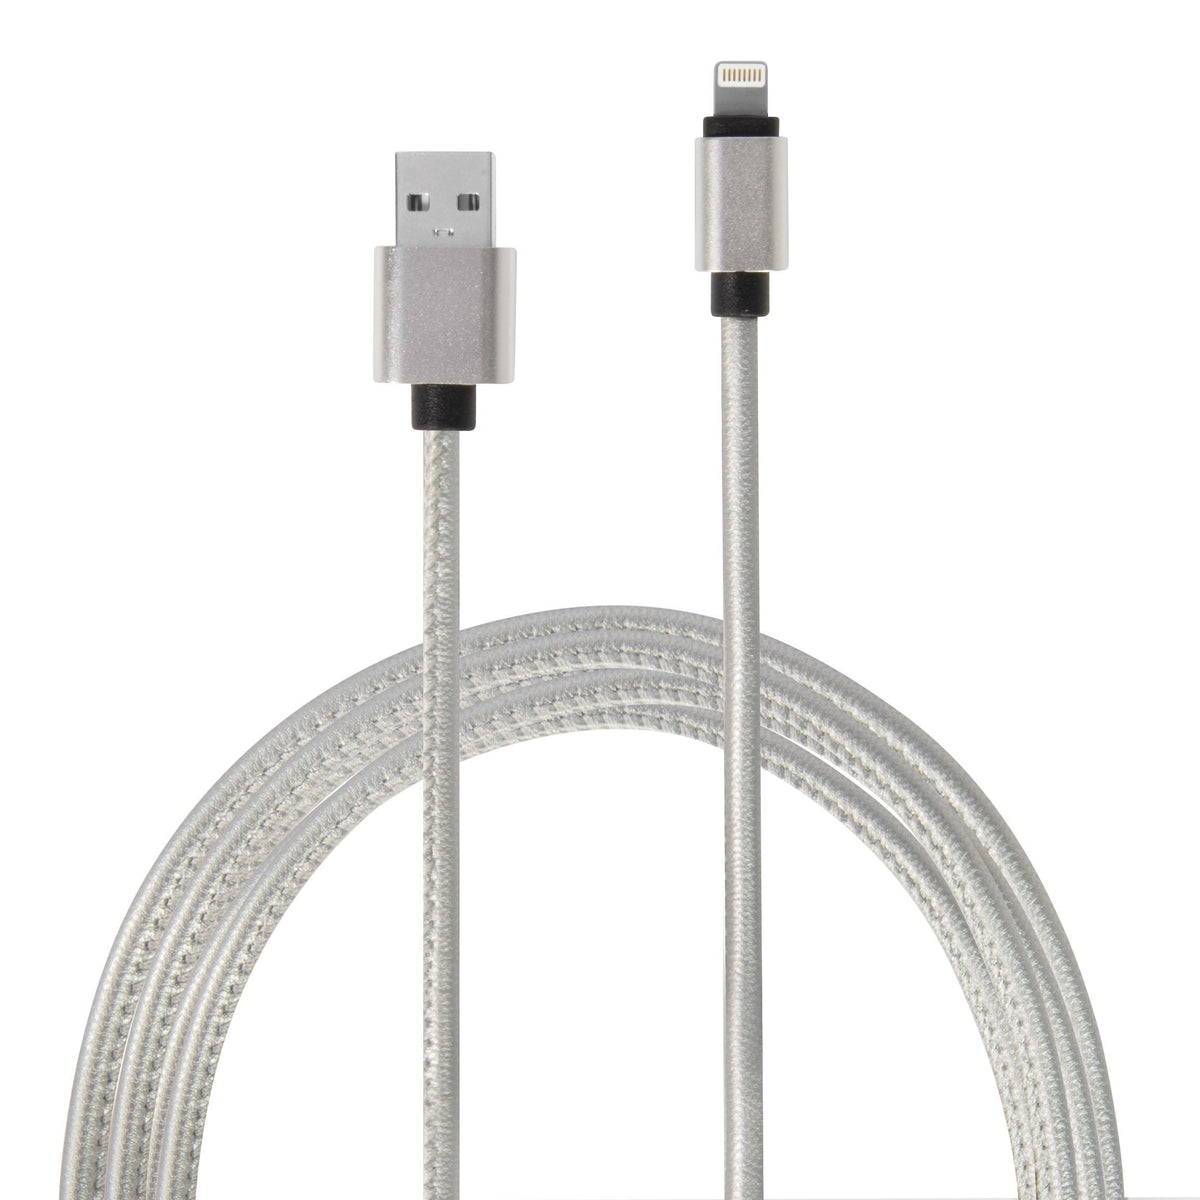 IS Gifts Mobile Phone Accessories Silver / Micro USB (Android) Android/IOS PU Leather USB Charging Cable - 2mtr tween and teen